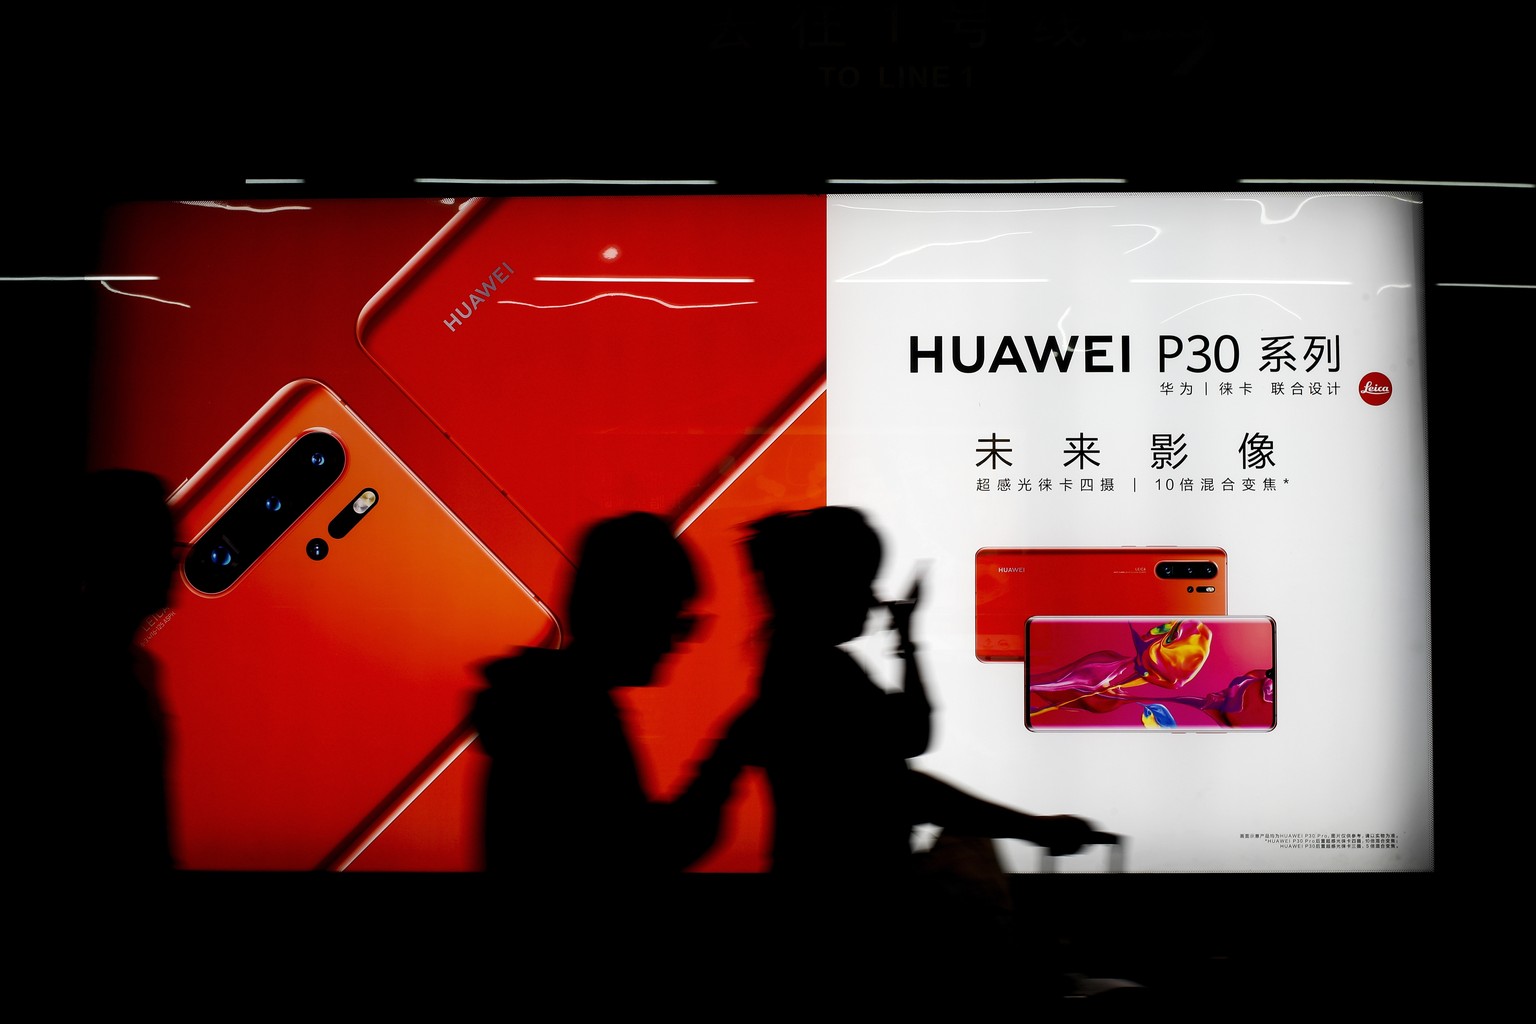 Commuters walk by the new Huawei P30 smartphone advertisement on display inside a subway station in Beijing Monday, May 13, 2019. China&#039;s intensified tariff war with the Trump administration is t ...